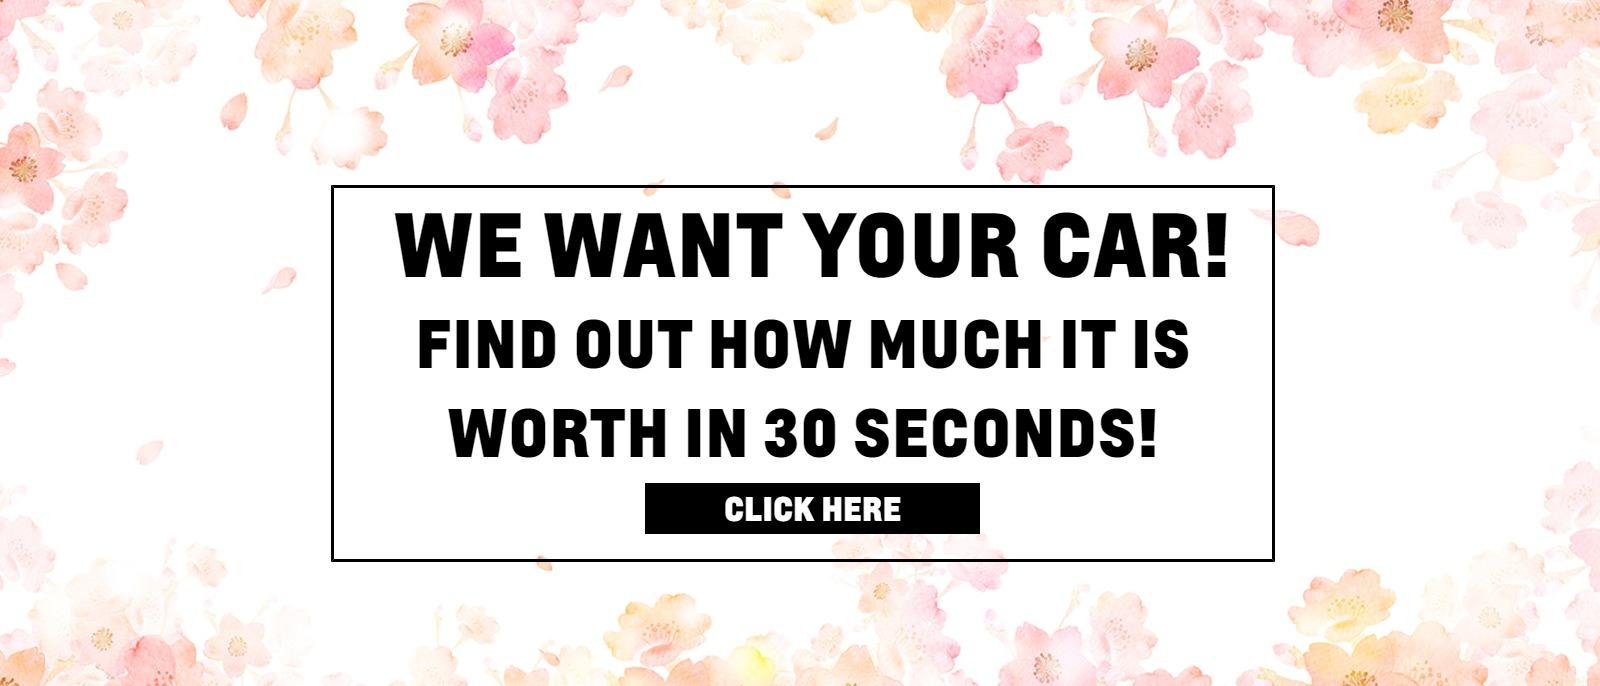 We Want Your Car! Find out how much it is worth in 30 seconds!